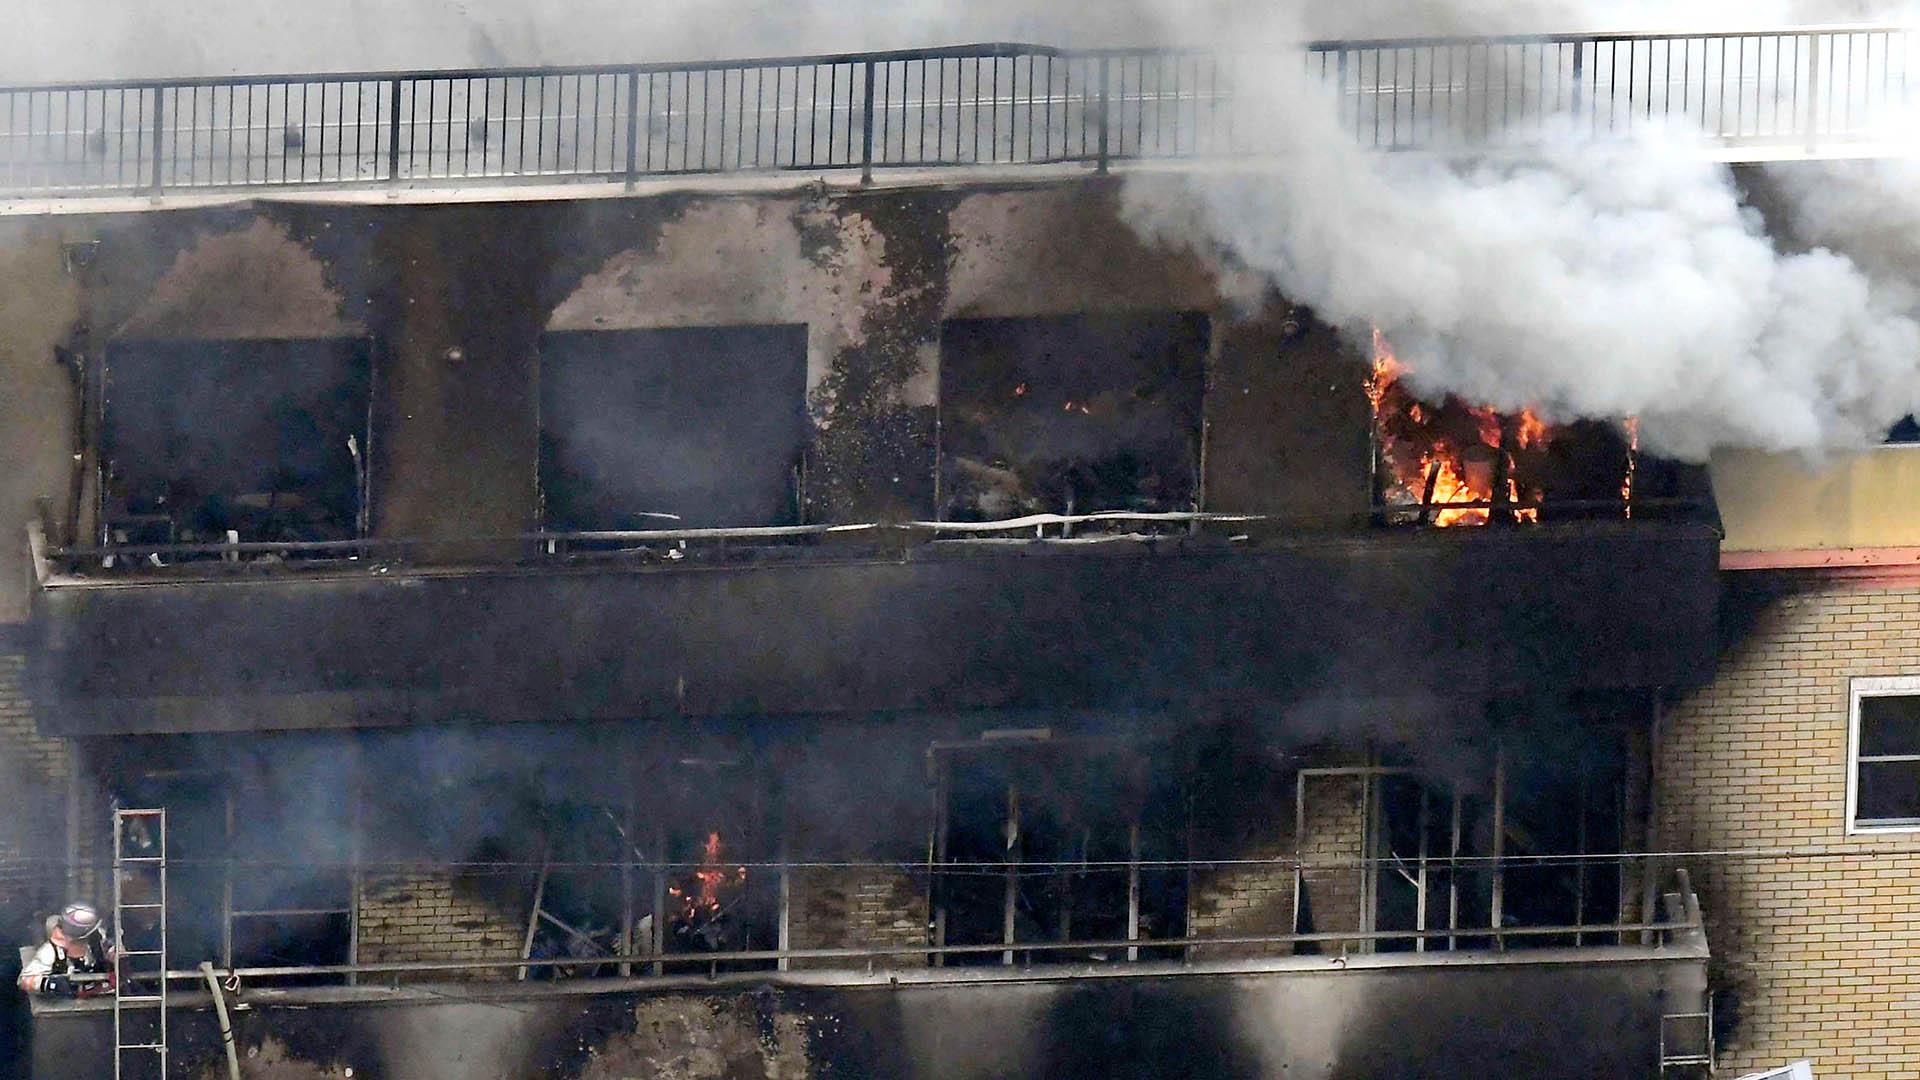 Arson suspected in deadly fire at anime studio in Kyoto Japan